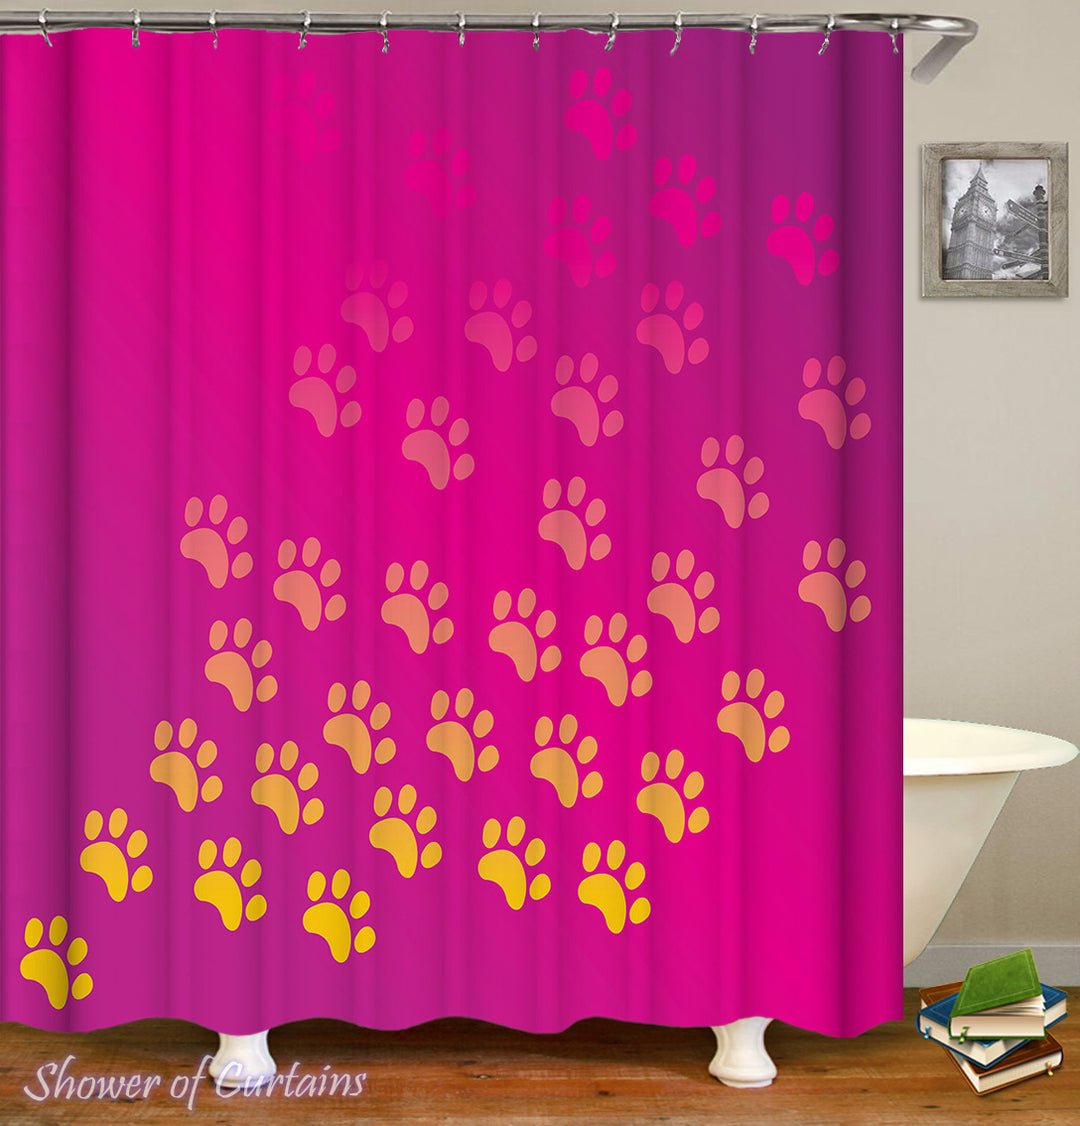 Shower Curtains of Dog Paws Over Red Violet Shower Curtain